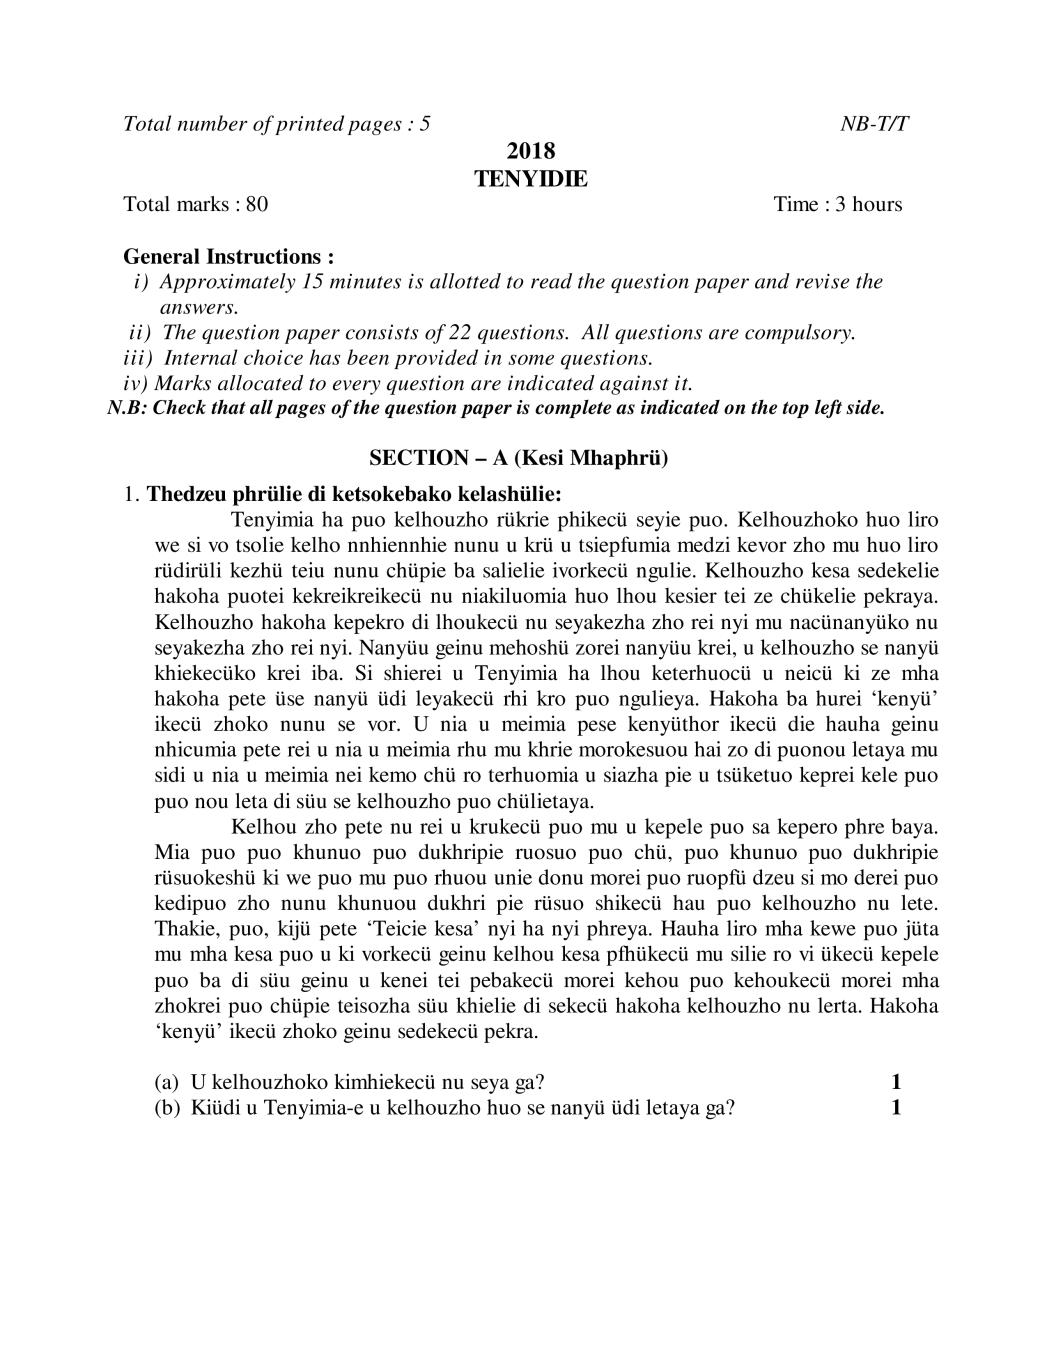 NBSE Class 10 Question Paper 2018 for Tenyidie - Page 1